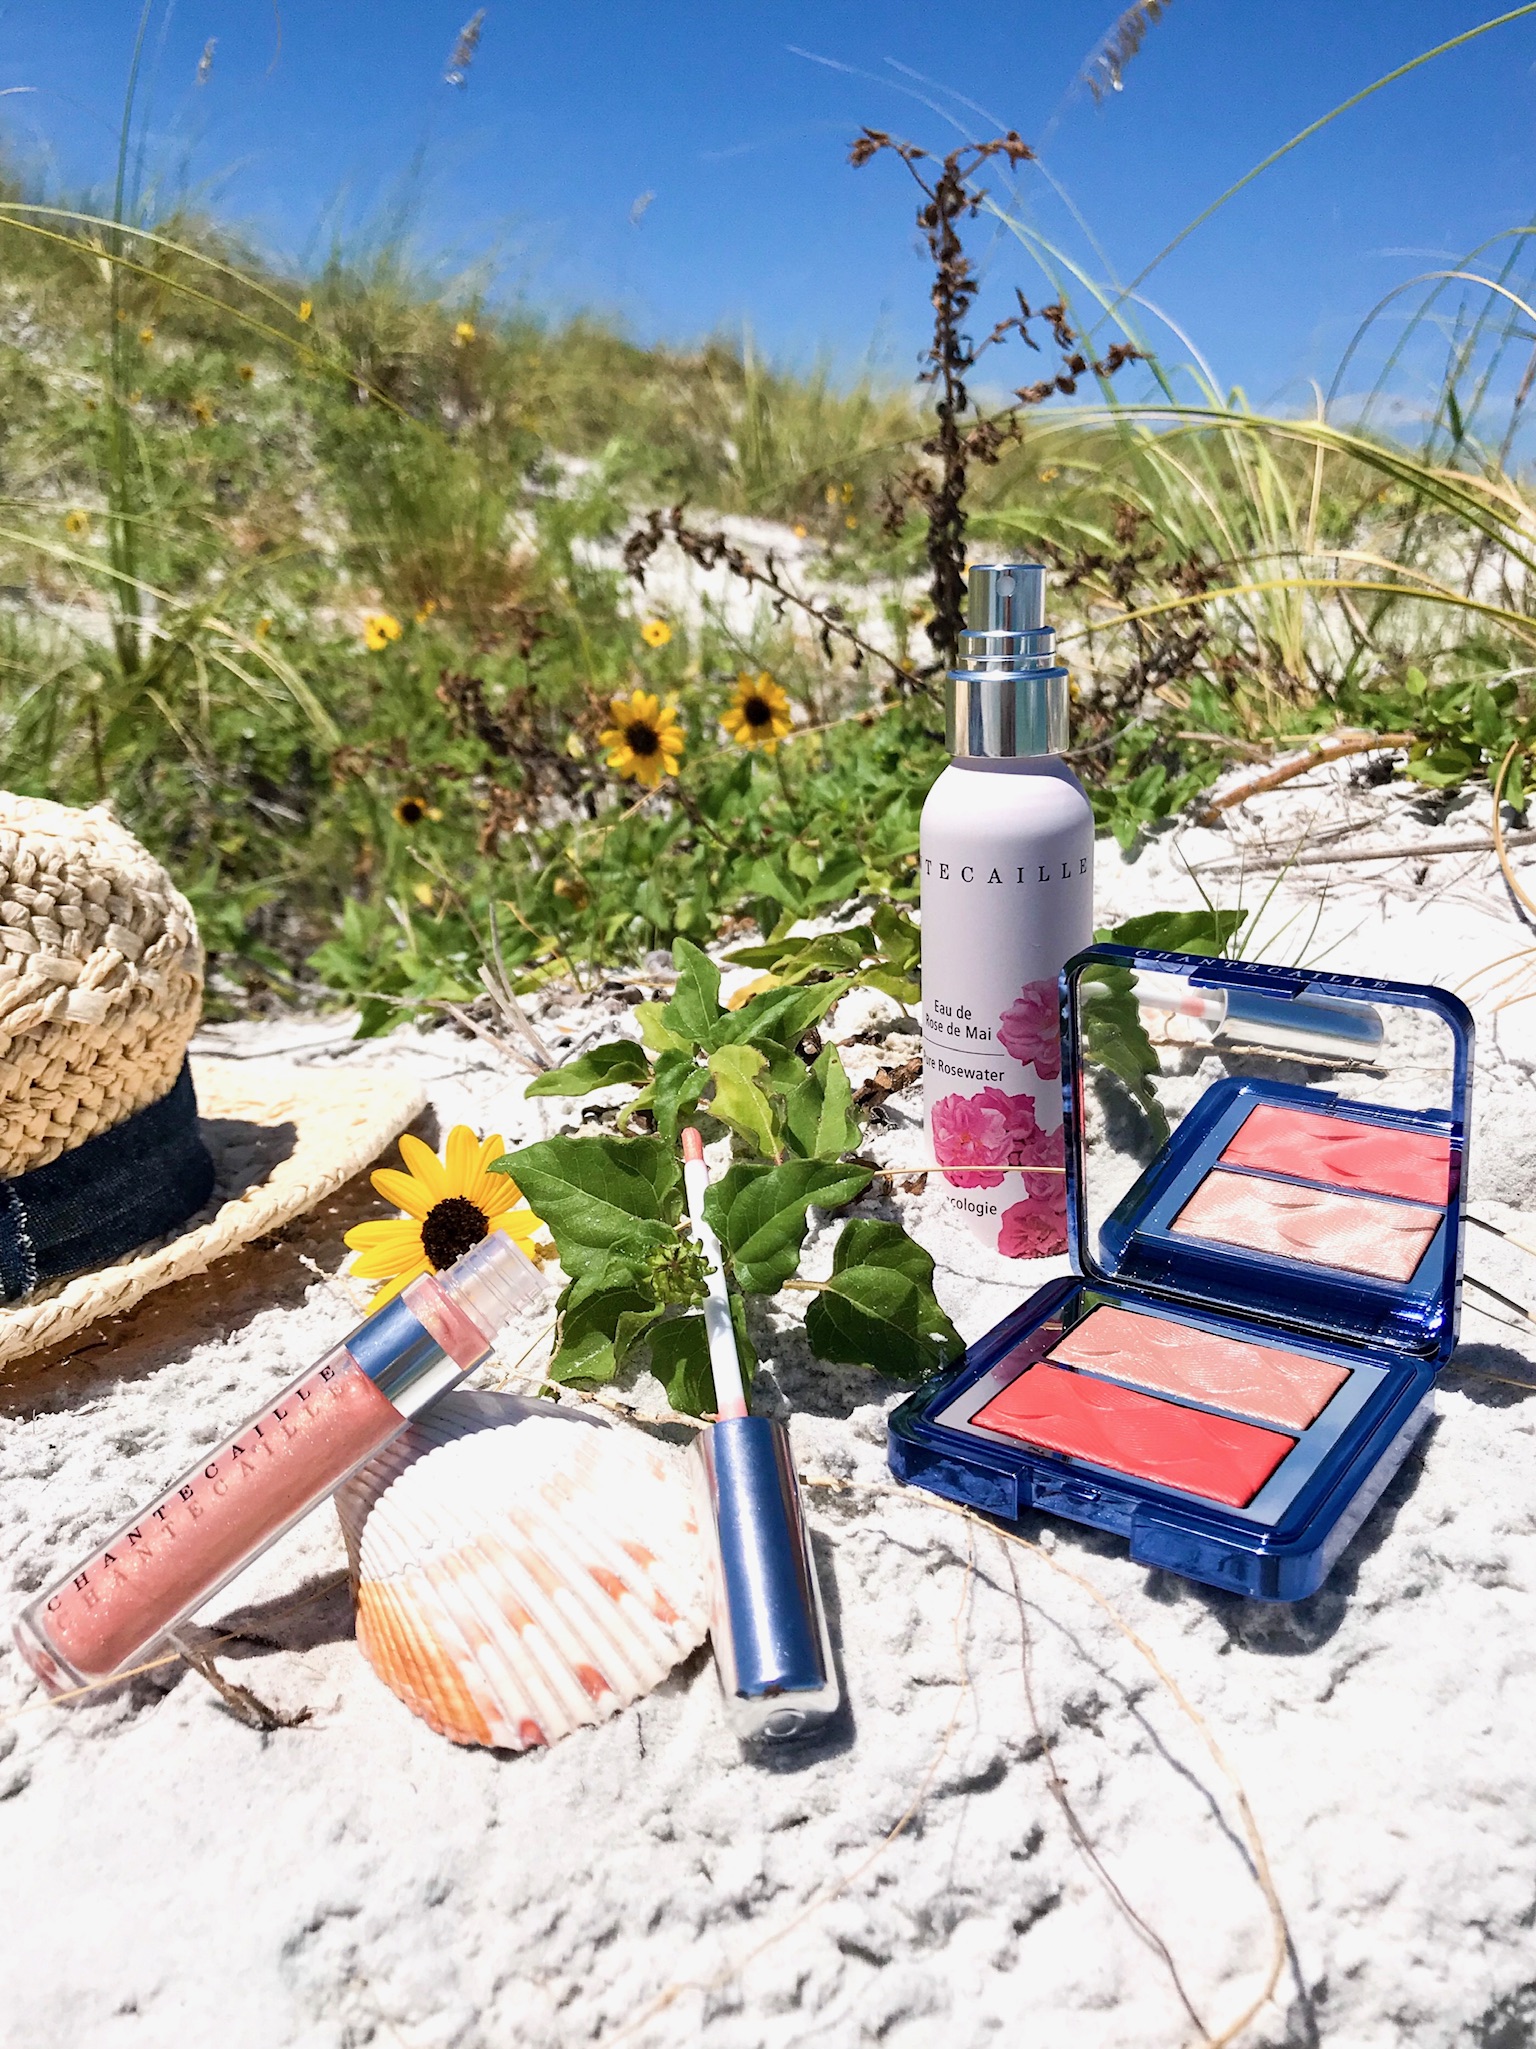 Chantecaille Summer Sale: What I Bought - Cat's Daily Living